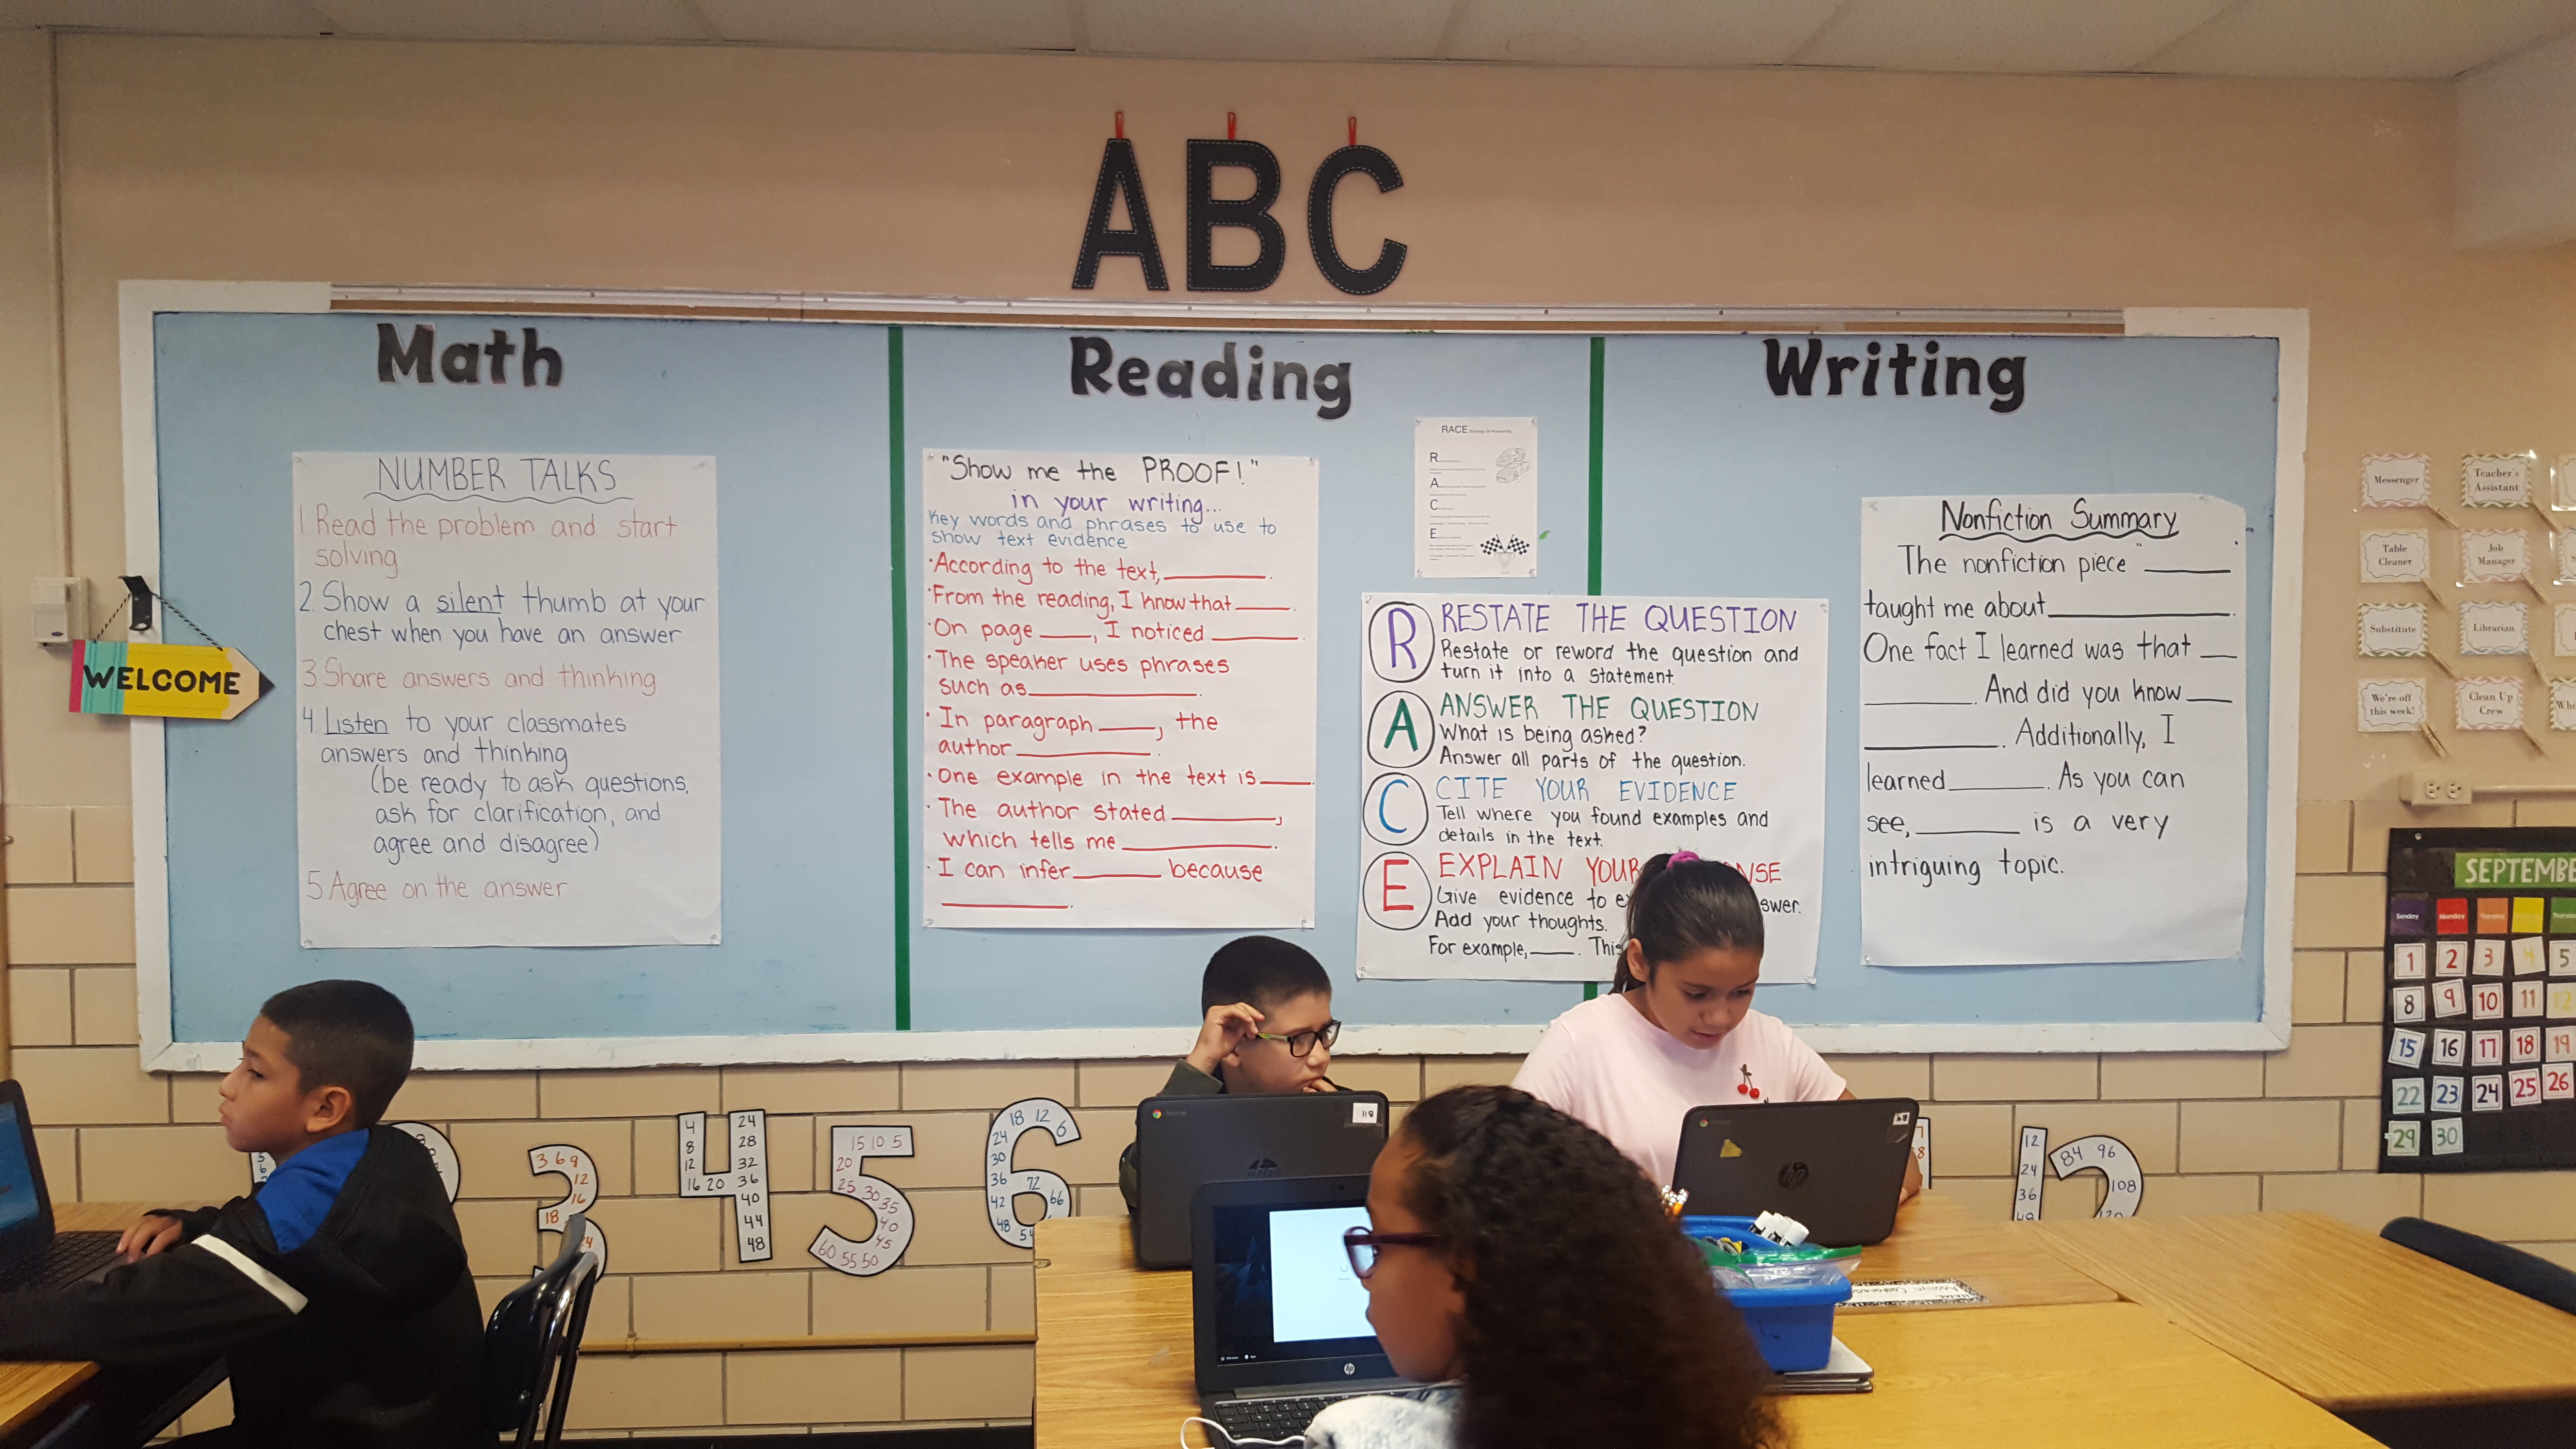 Elementary students work at their desks. The wall behind them is decorated with math, reading, and writing lessons. Large letters ABC are above.